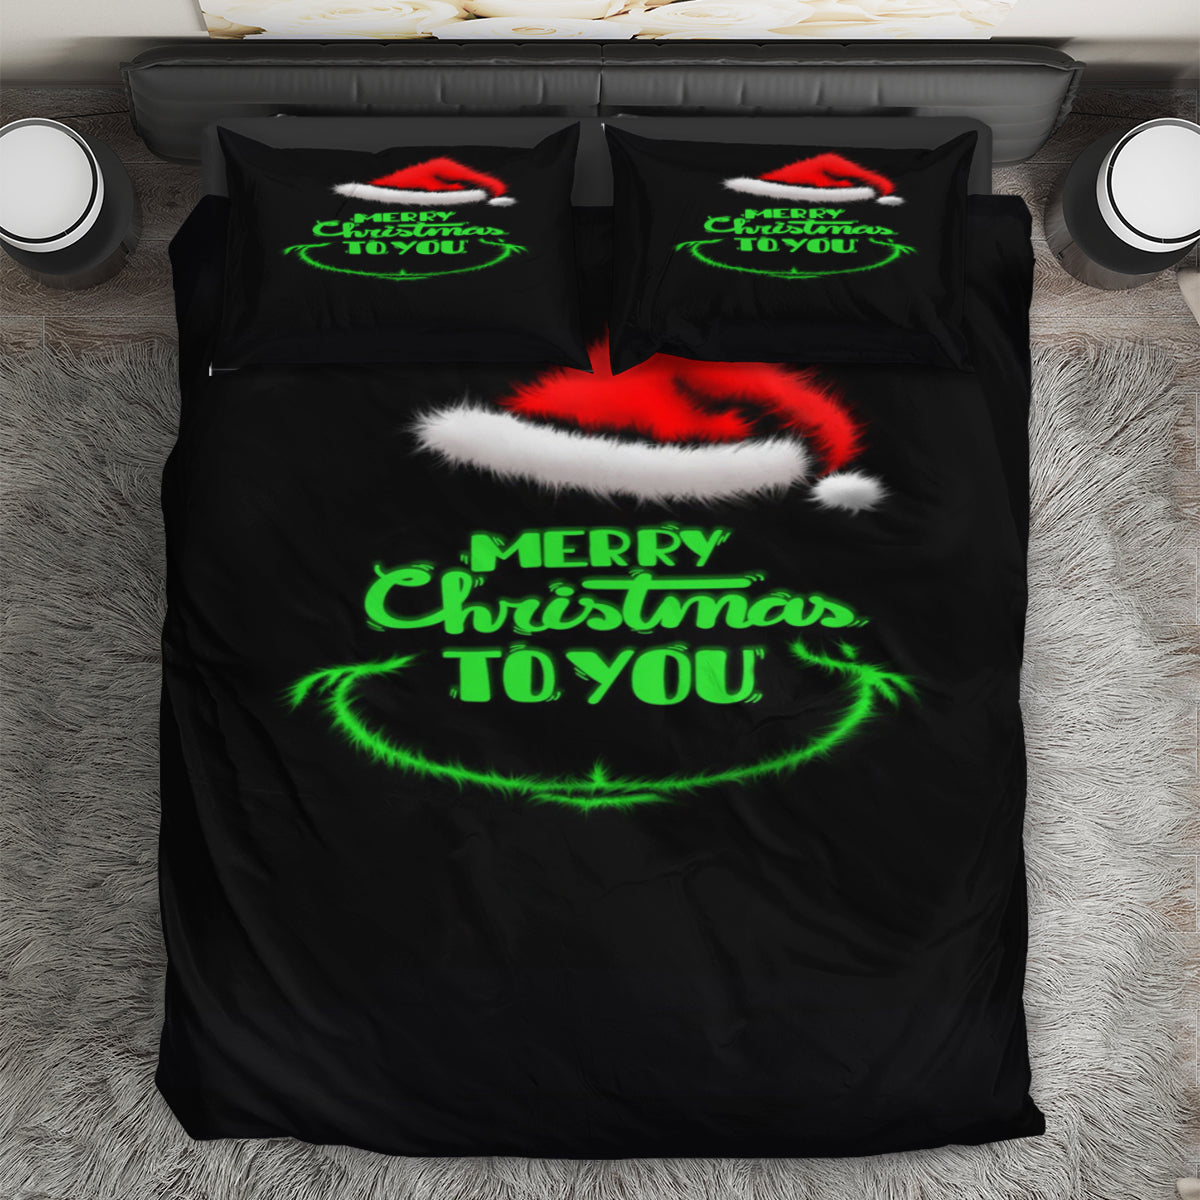 The Grinch Christmas Merry Xmas 3 3PCS Bedding Set Duvet Cover And Pillow Cases Gift For Fan